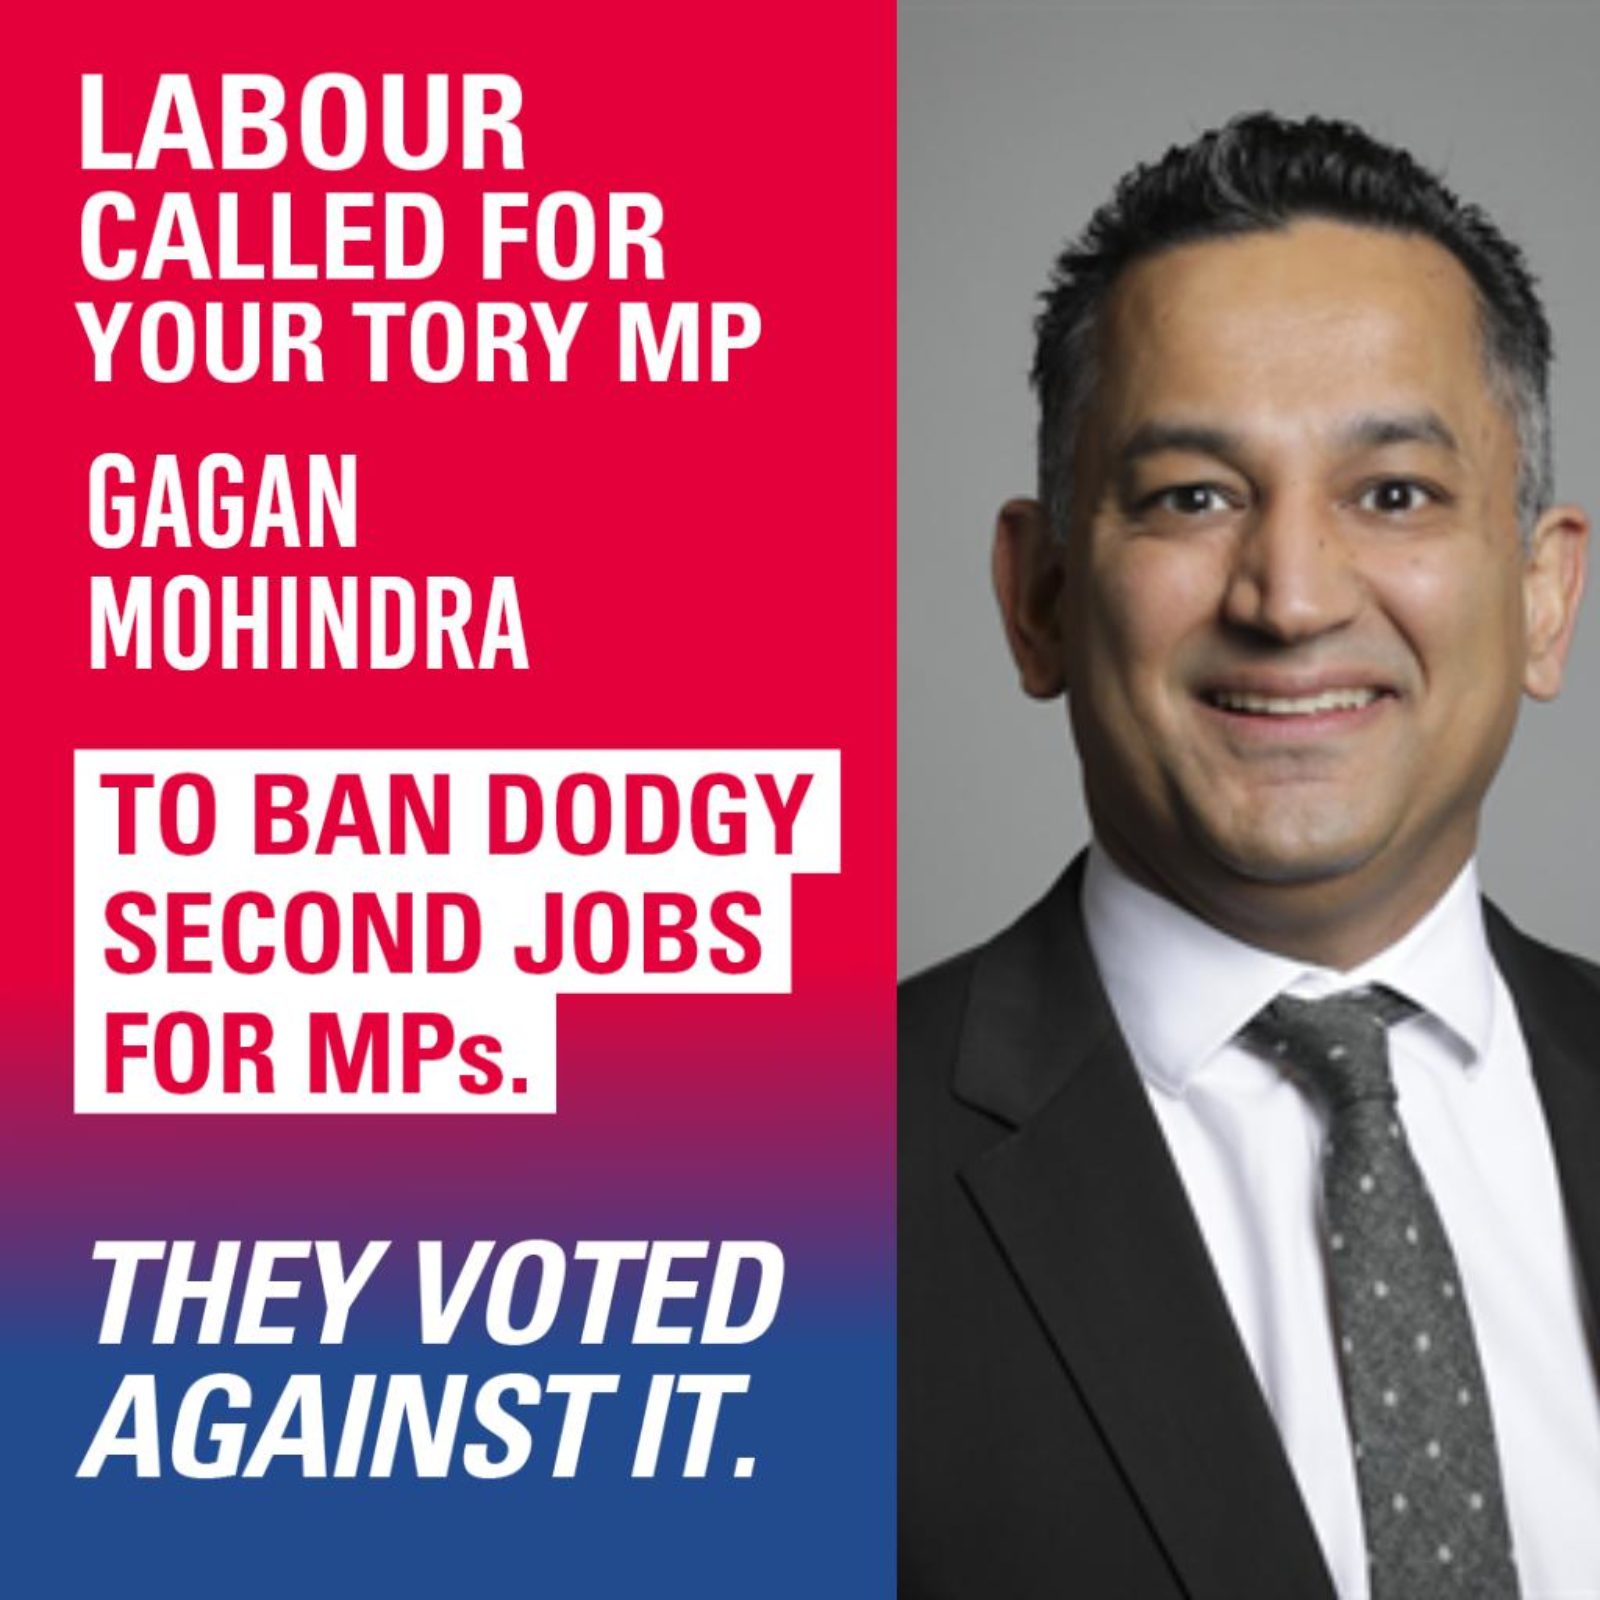 Labour called for your Tory MP Gagan Mohindra to ban dodgy second jobs for MPs.  They voted against it.